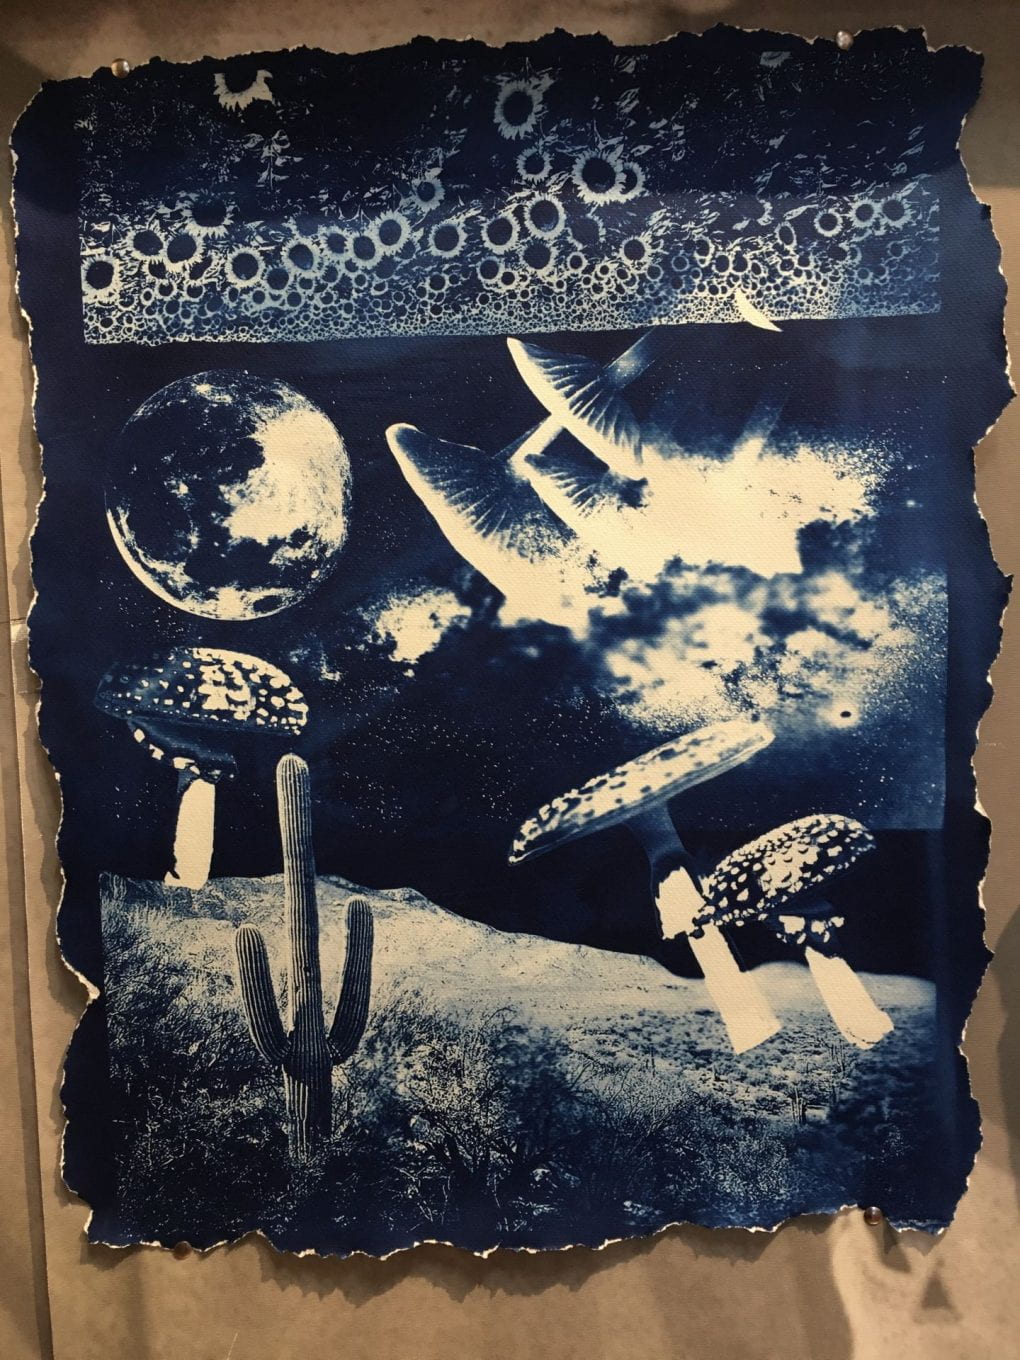 In dark blue cyanotype, collage piece, an alien planet filled with giant mushrooms, a tall cactus and overhead an upside-down field of sunflowers. The edges of the paper are purposely frayed